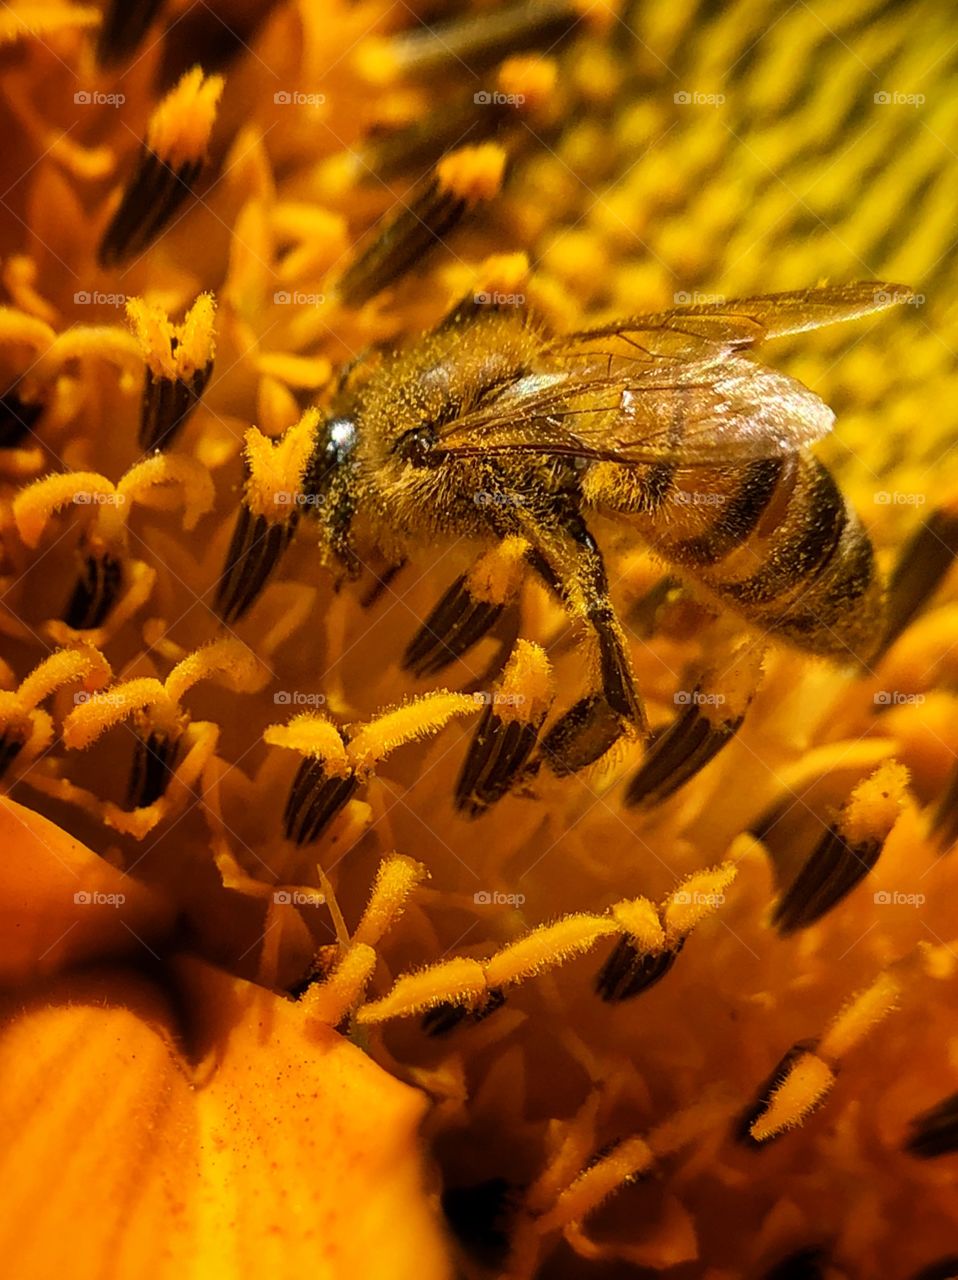 A closeup on a little working bee, full of pollen, on a sunflower. Who could imagine this little worker would carry so much pollen in its flights...